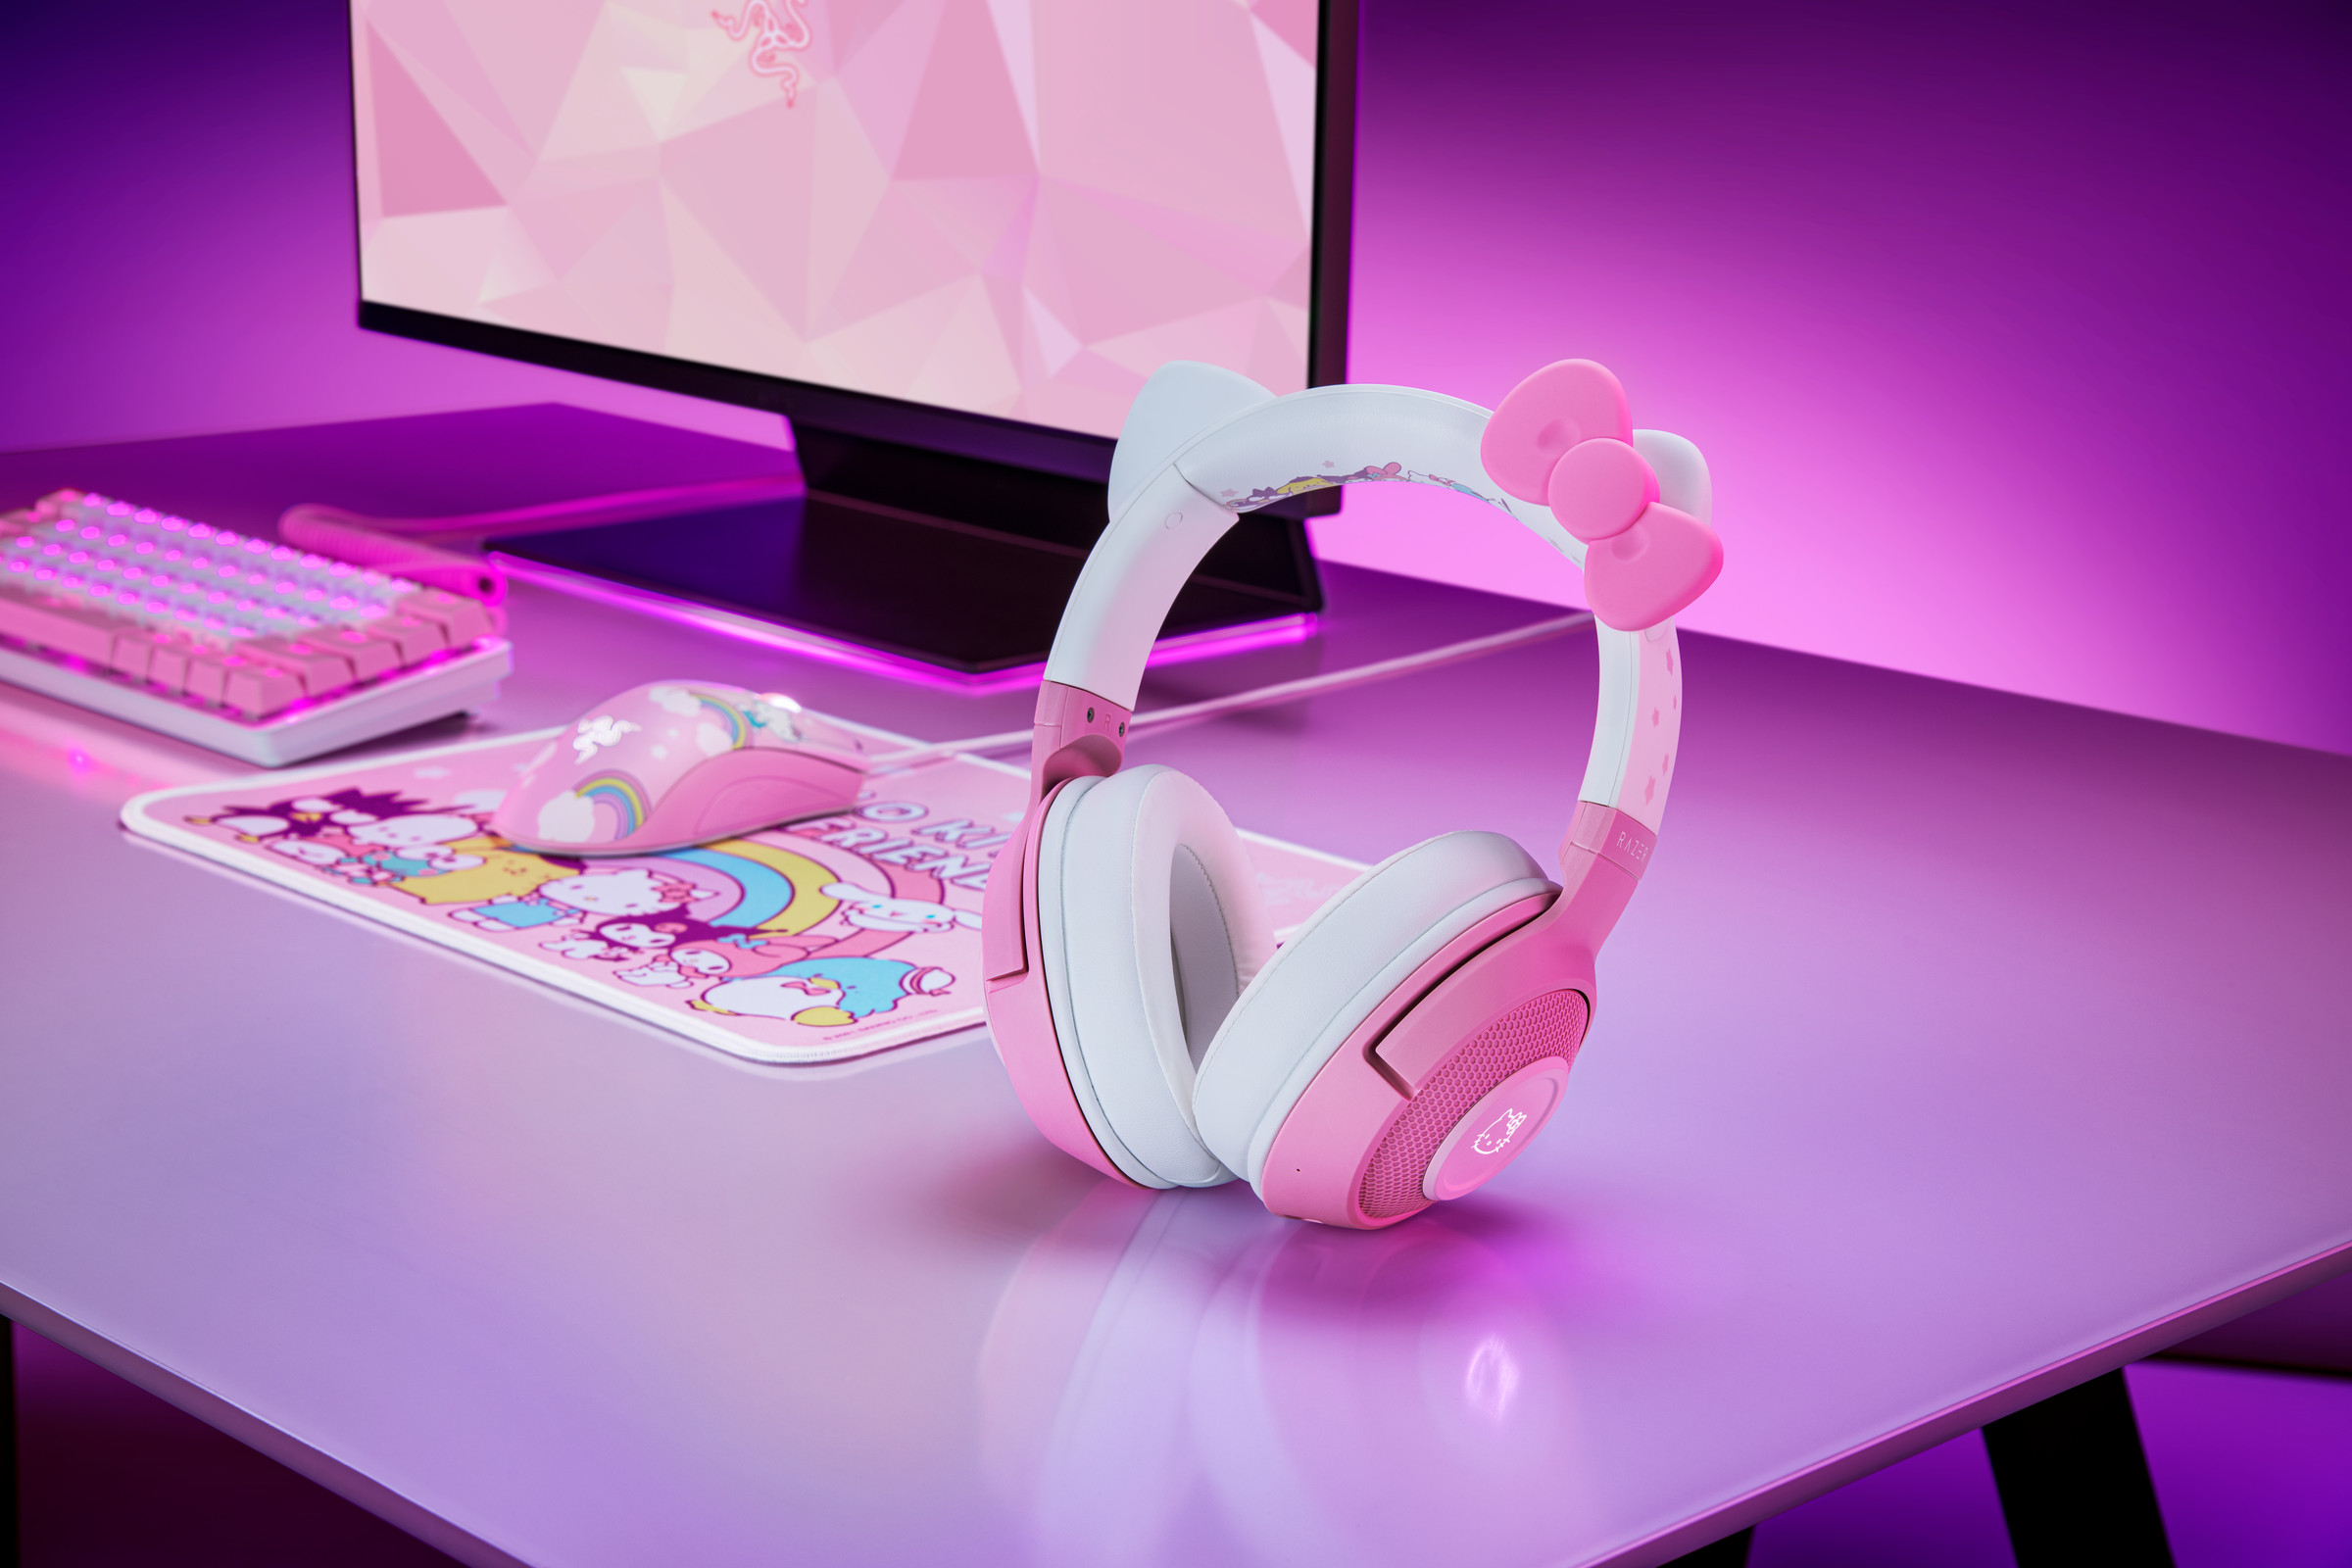 Razer’s Hello Kitty headset on a pink table with a pink keyboard, mousepad, and monitor in the background.